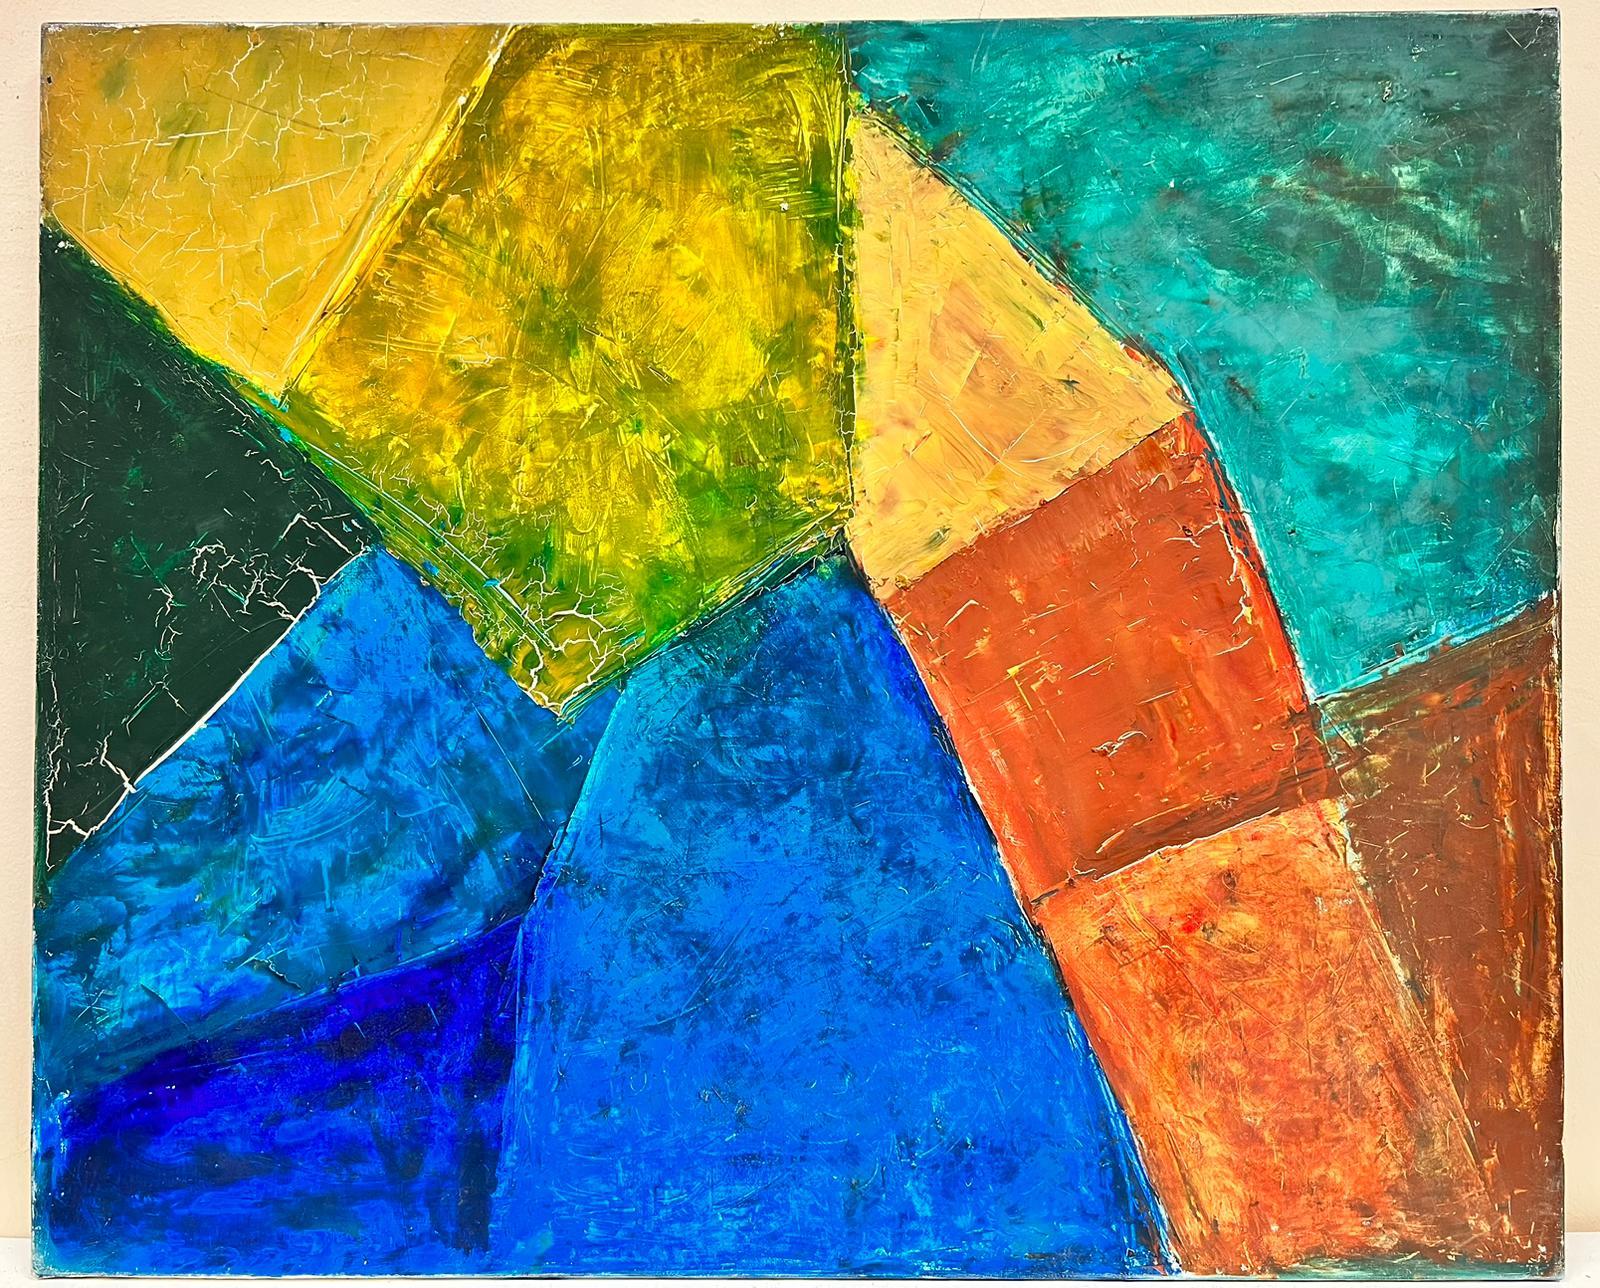 Large French Abstract Cubist Composition Orange Beige Green Blue Colors - Painting by Édouard Righetti (1924-2001)